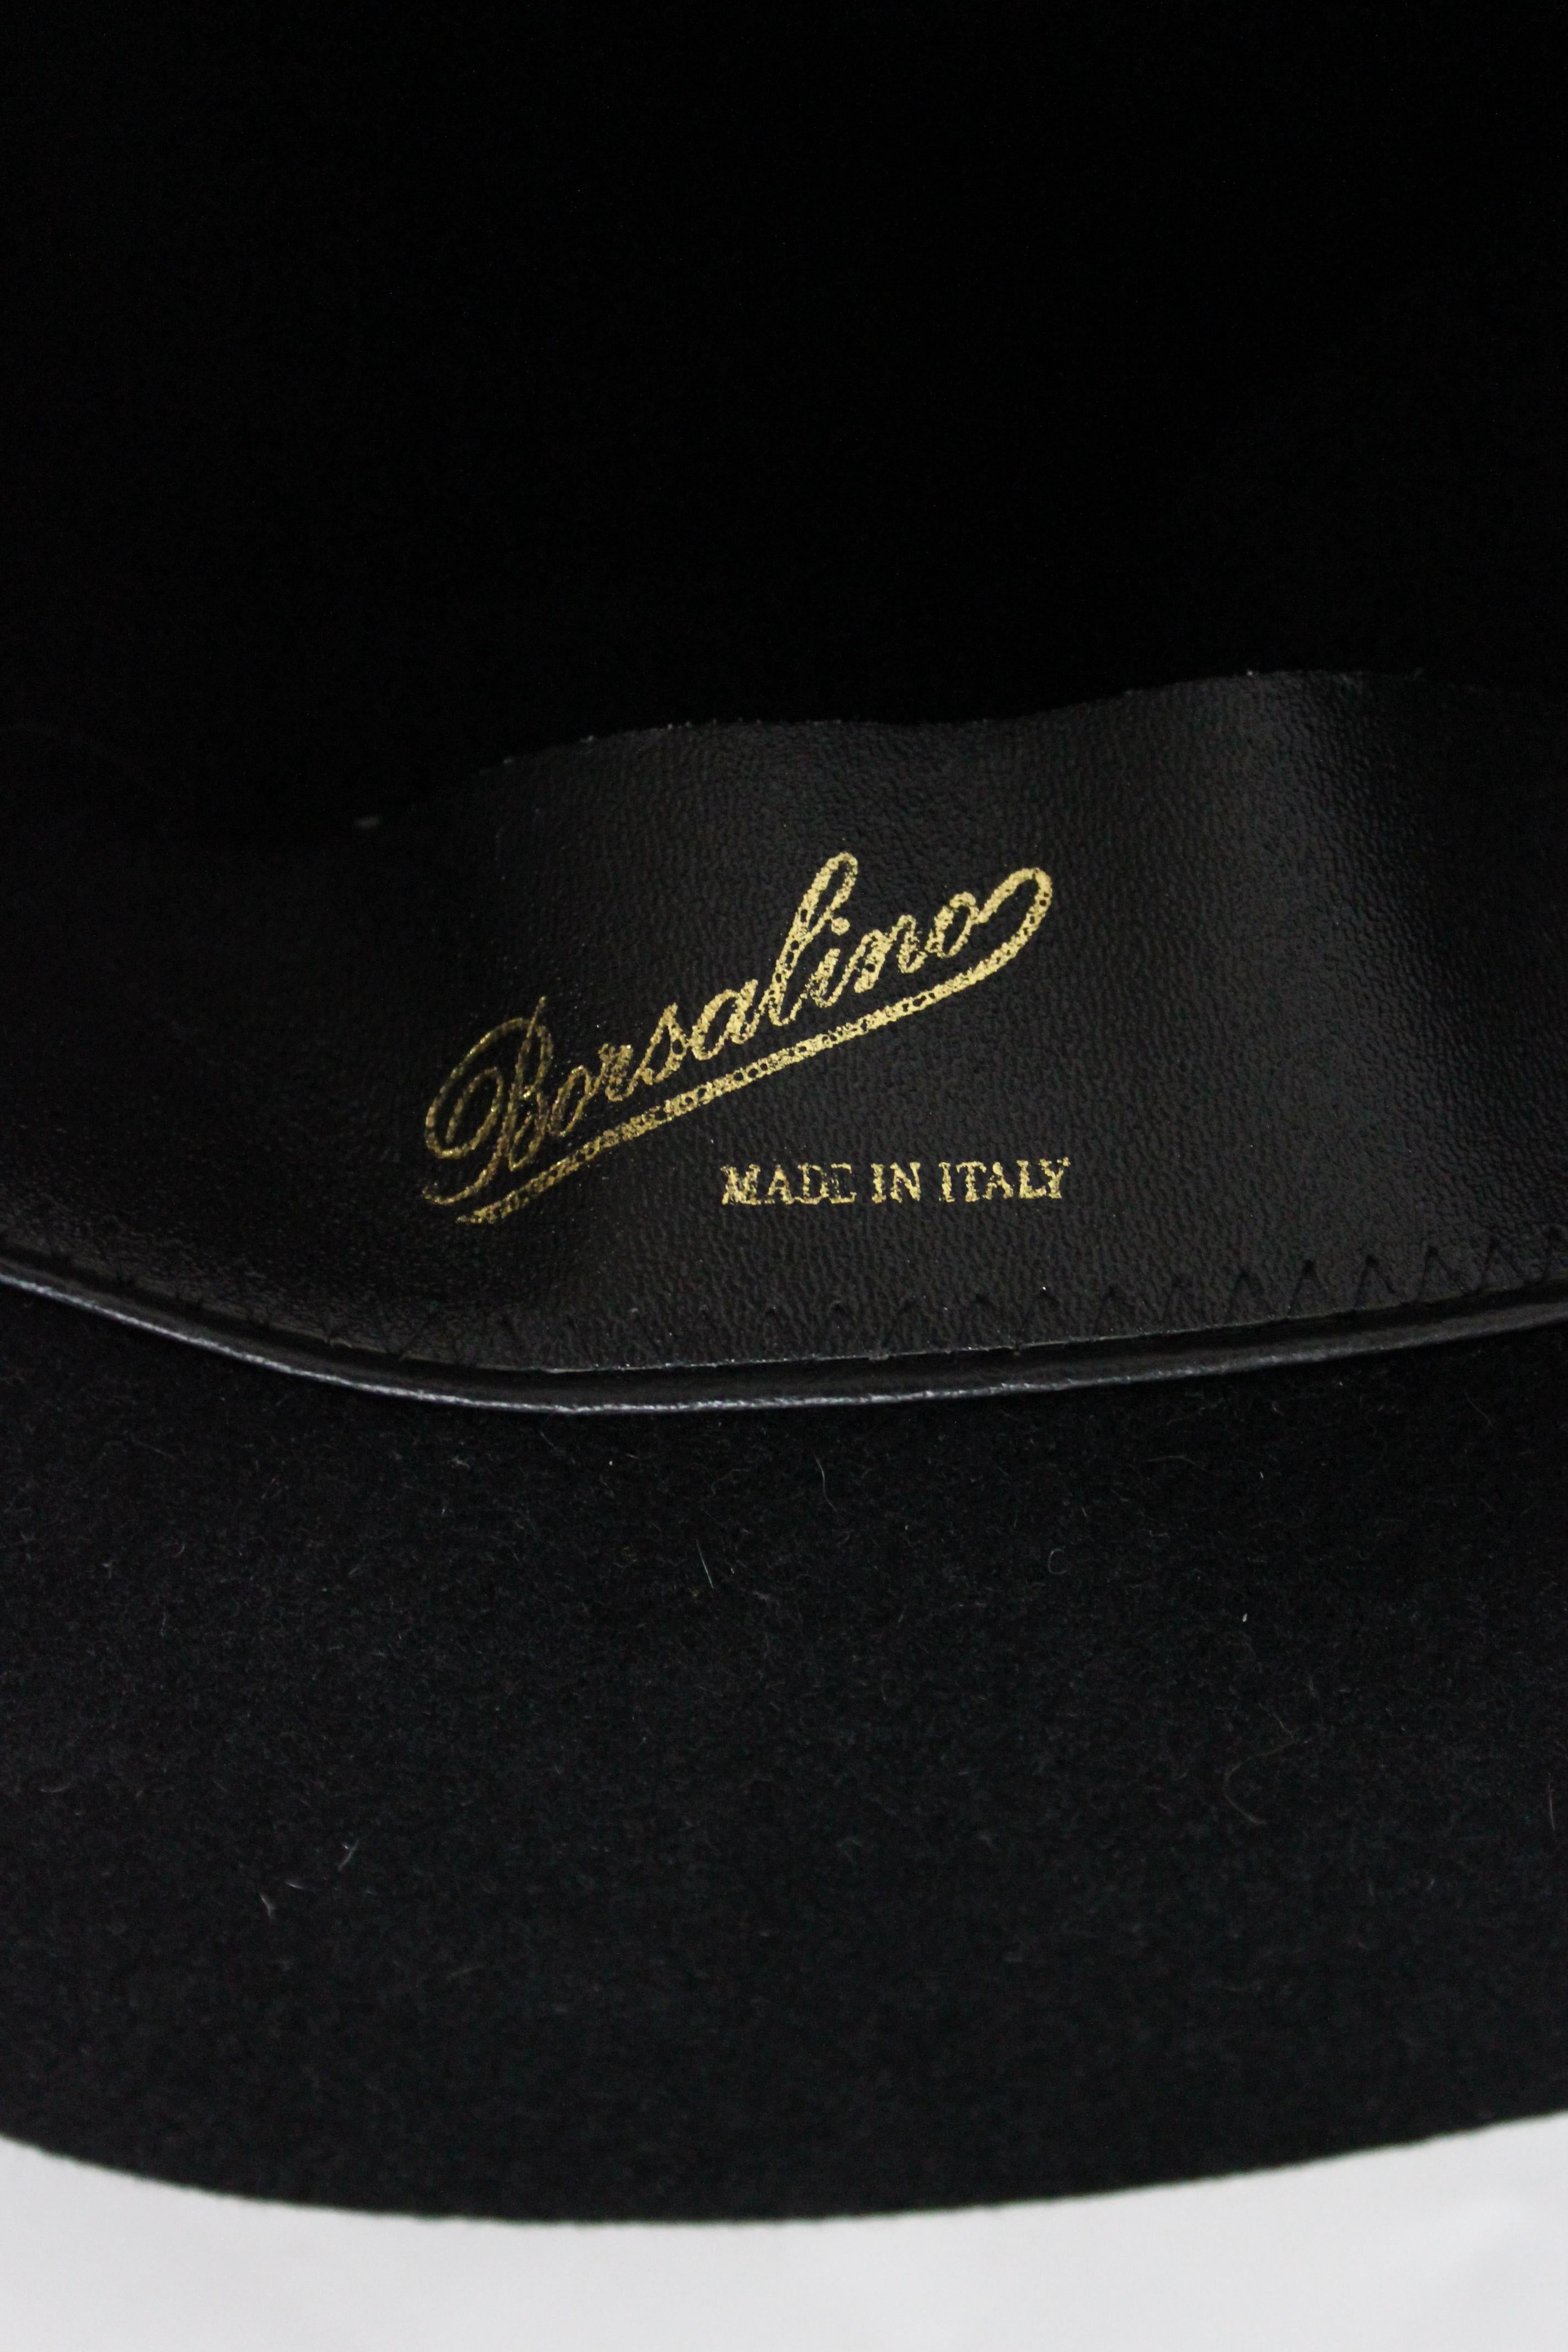 Borsalino vintage 90s hat. Fedora hat, black color. Felt fabric with ribbon along the circumference, closed by the typical bow. Made in Italy.

Condition: Excellent

Item used few times, it remains in its excellent condition. There are no visible